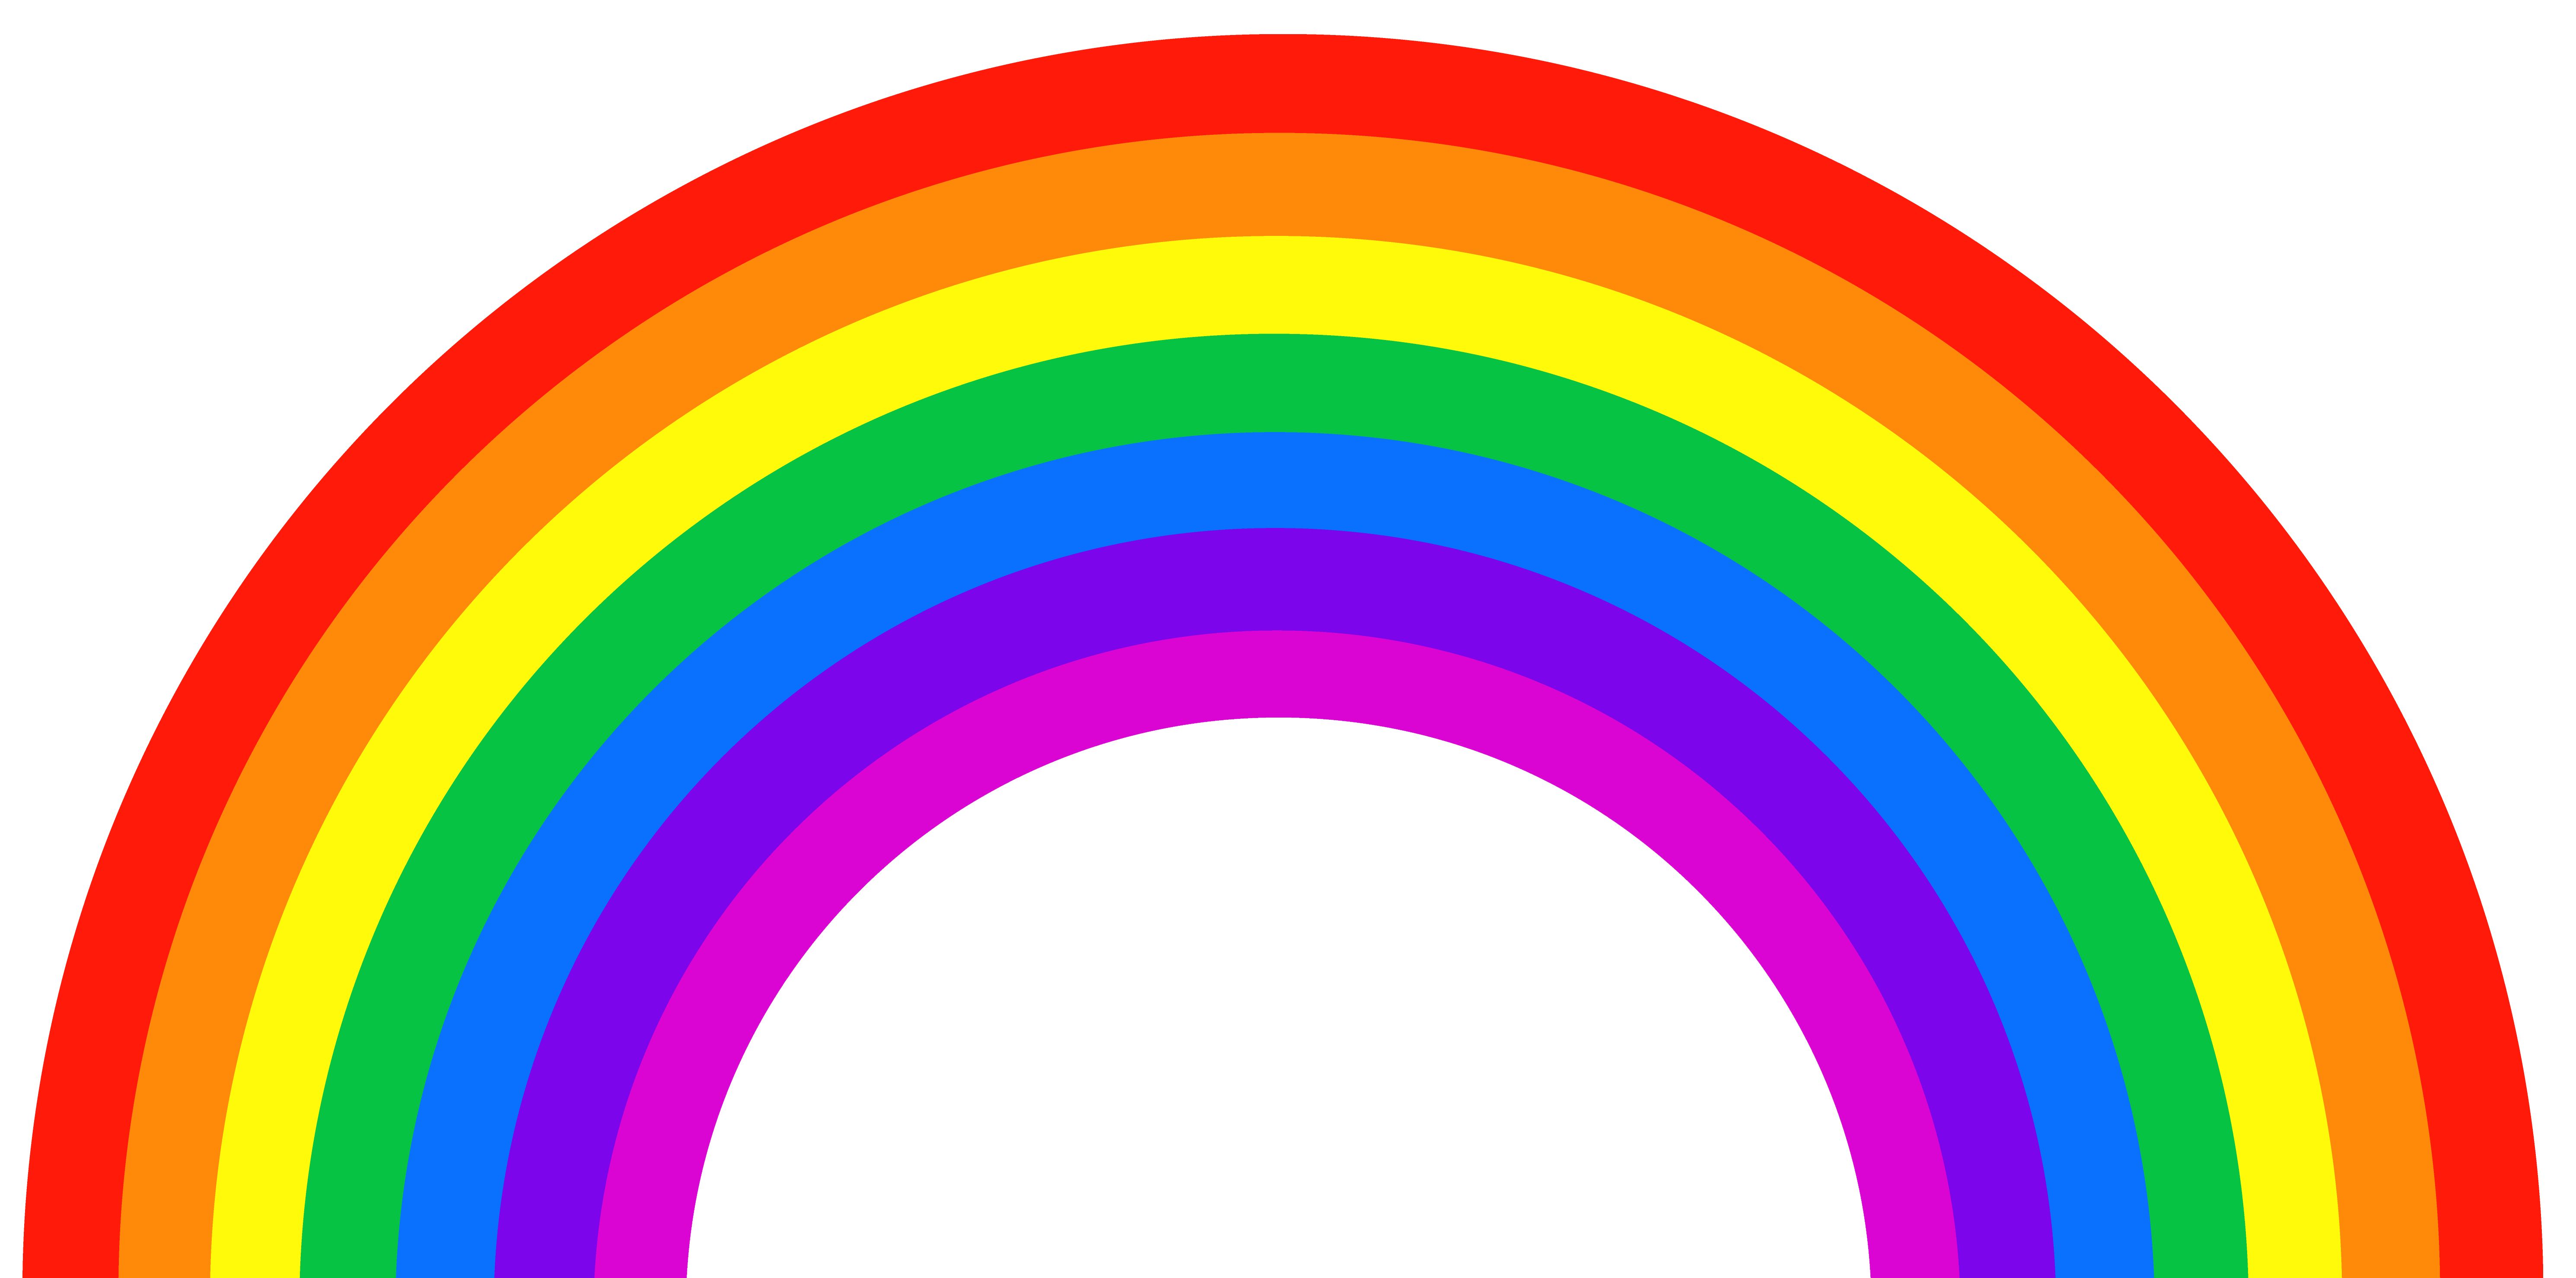 Clipart rainbow scene, Clipart rainbow scene Transparent FREE for